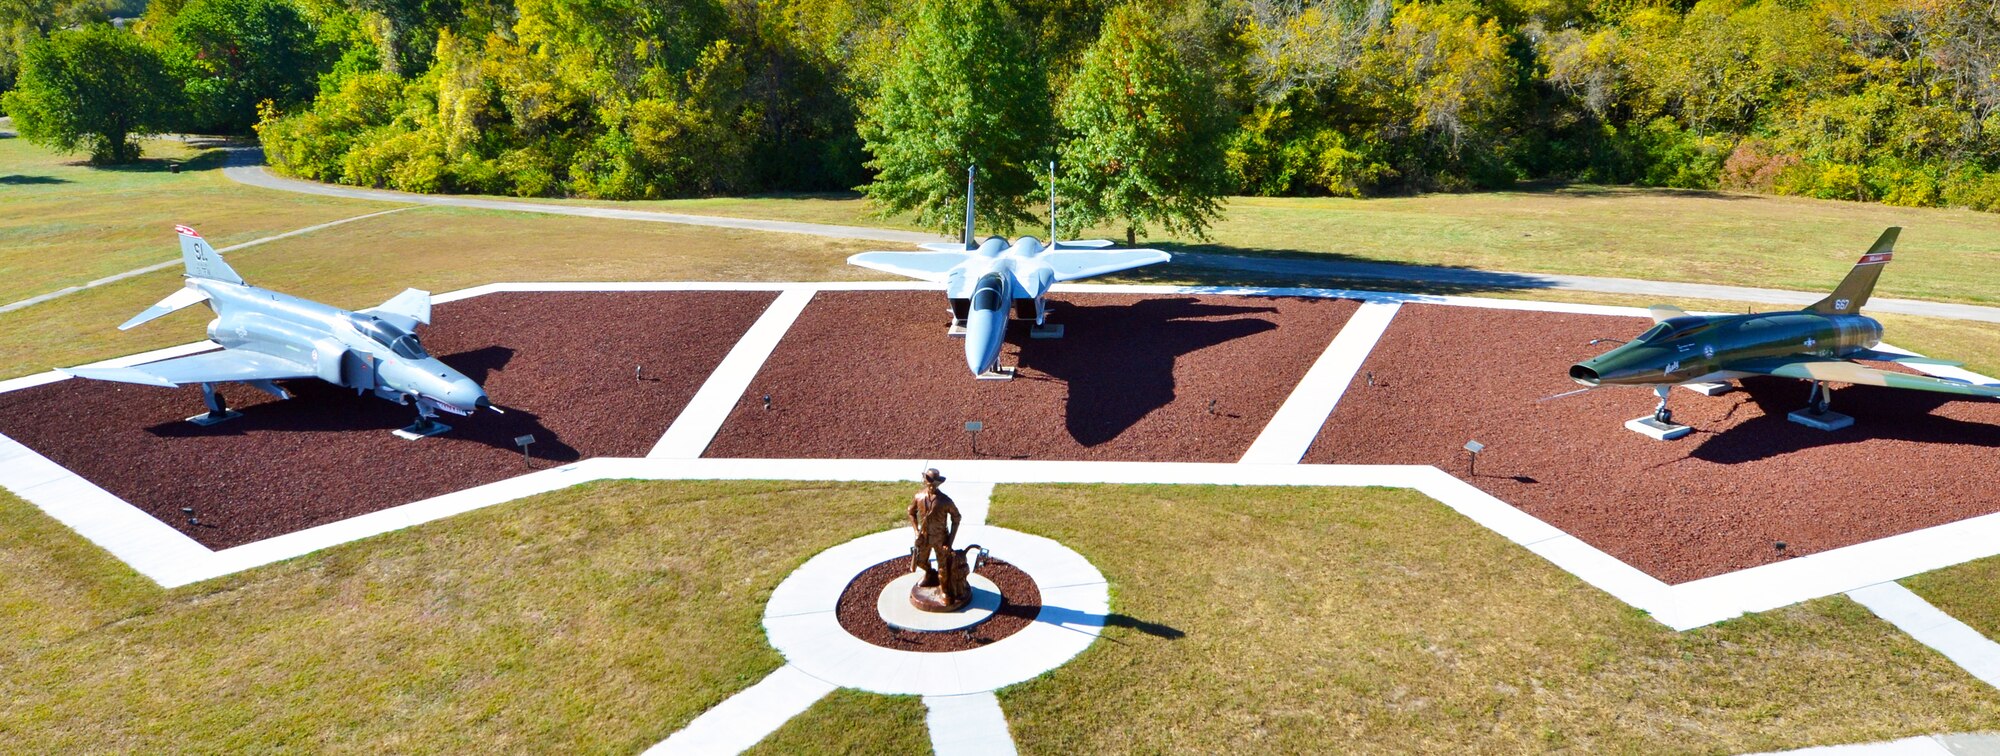 The Missouri Air National Guard's 131st Bomb Wing Heritage Park officially opened in June, 2015, at Whiteman Air Force Base, Missouri, and the installation is now complete with the recent addition of lava rock around the base of each aircraft and the Minuteman statue.  (U.S. Air National Guard photo by Senior Master Sgt. Mary-Dale Amison)